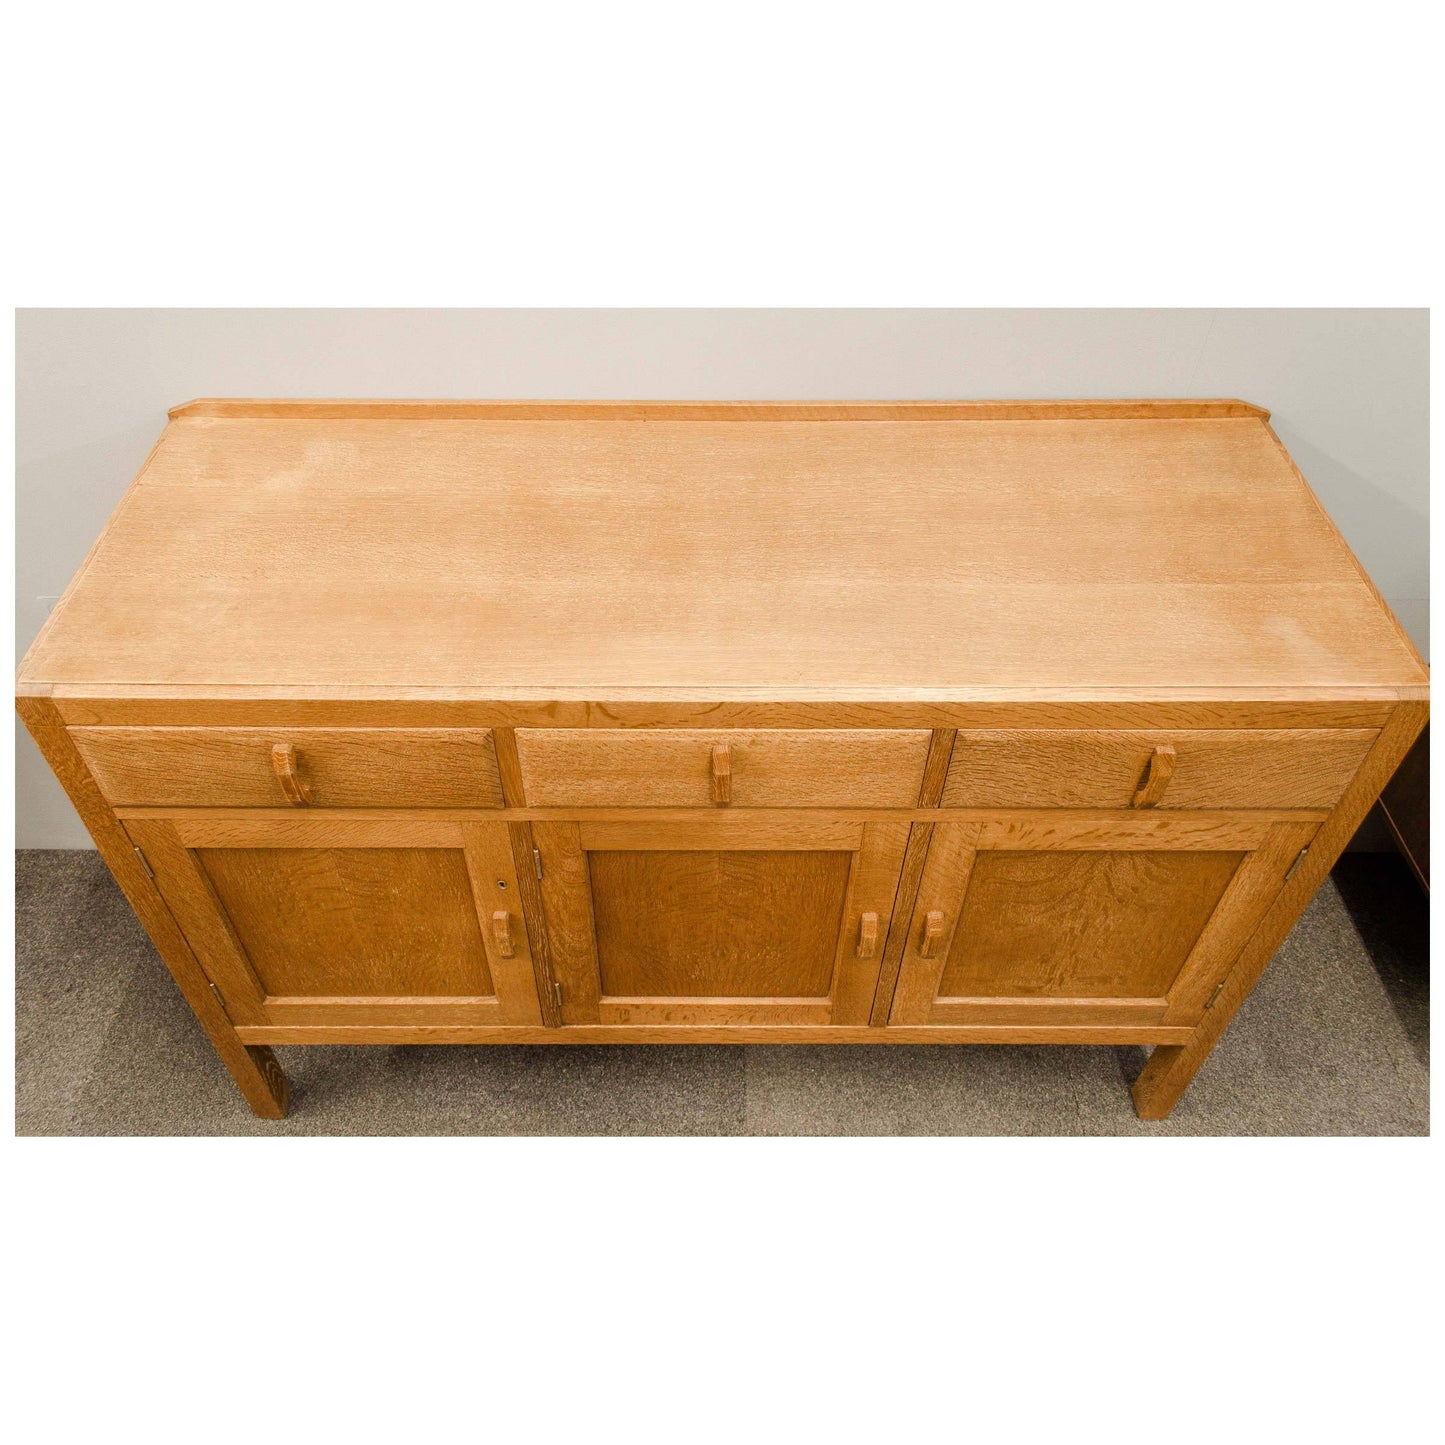 Heal and Co. (Ambrose Heal) Cotswold School Arts Crafts Oak Sideboard c. 1920